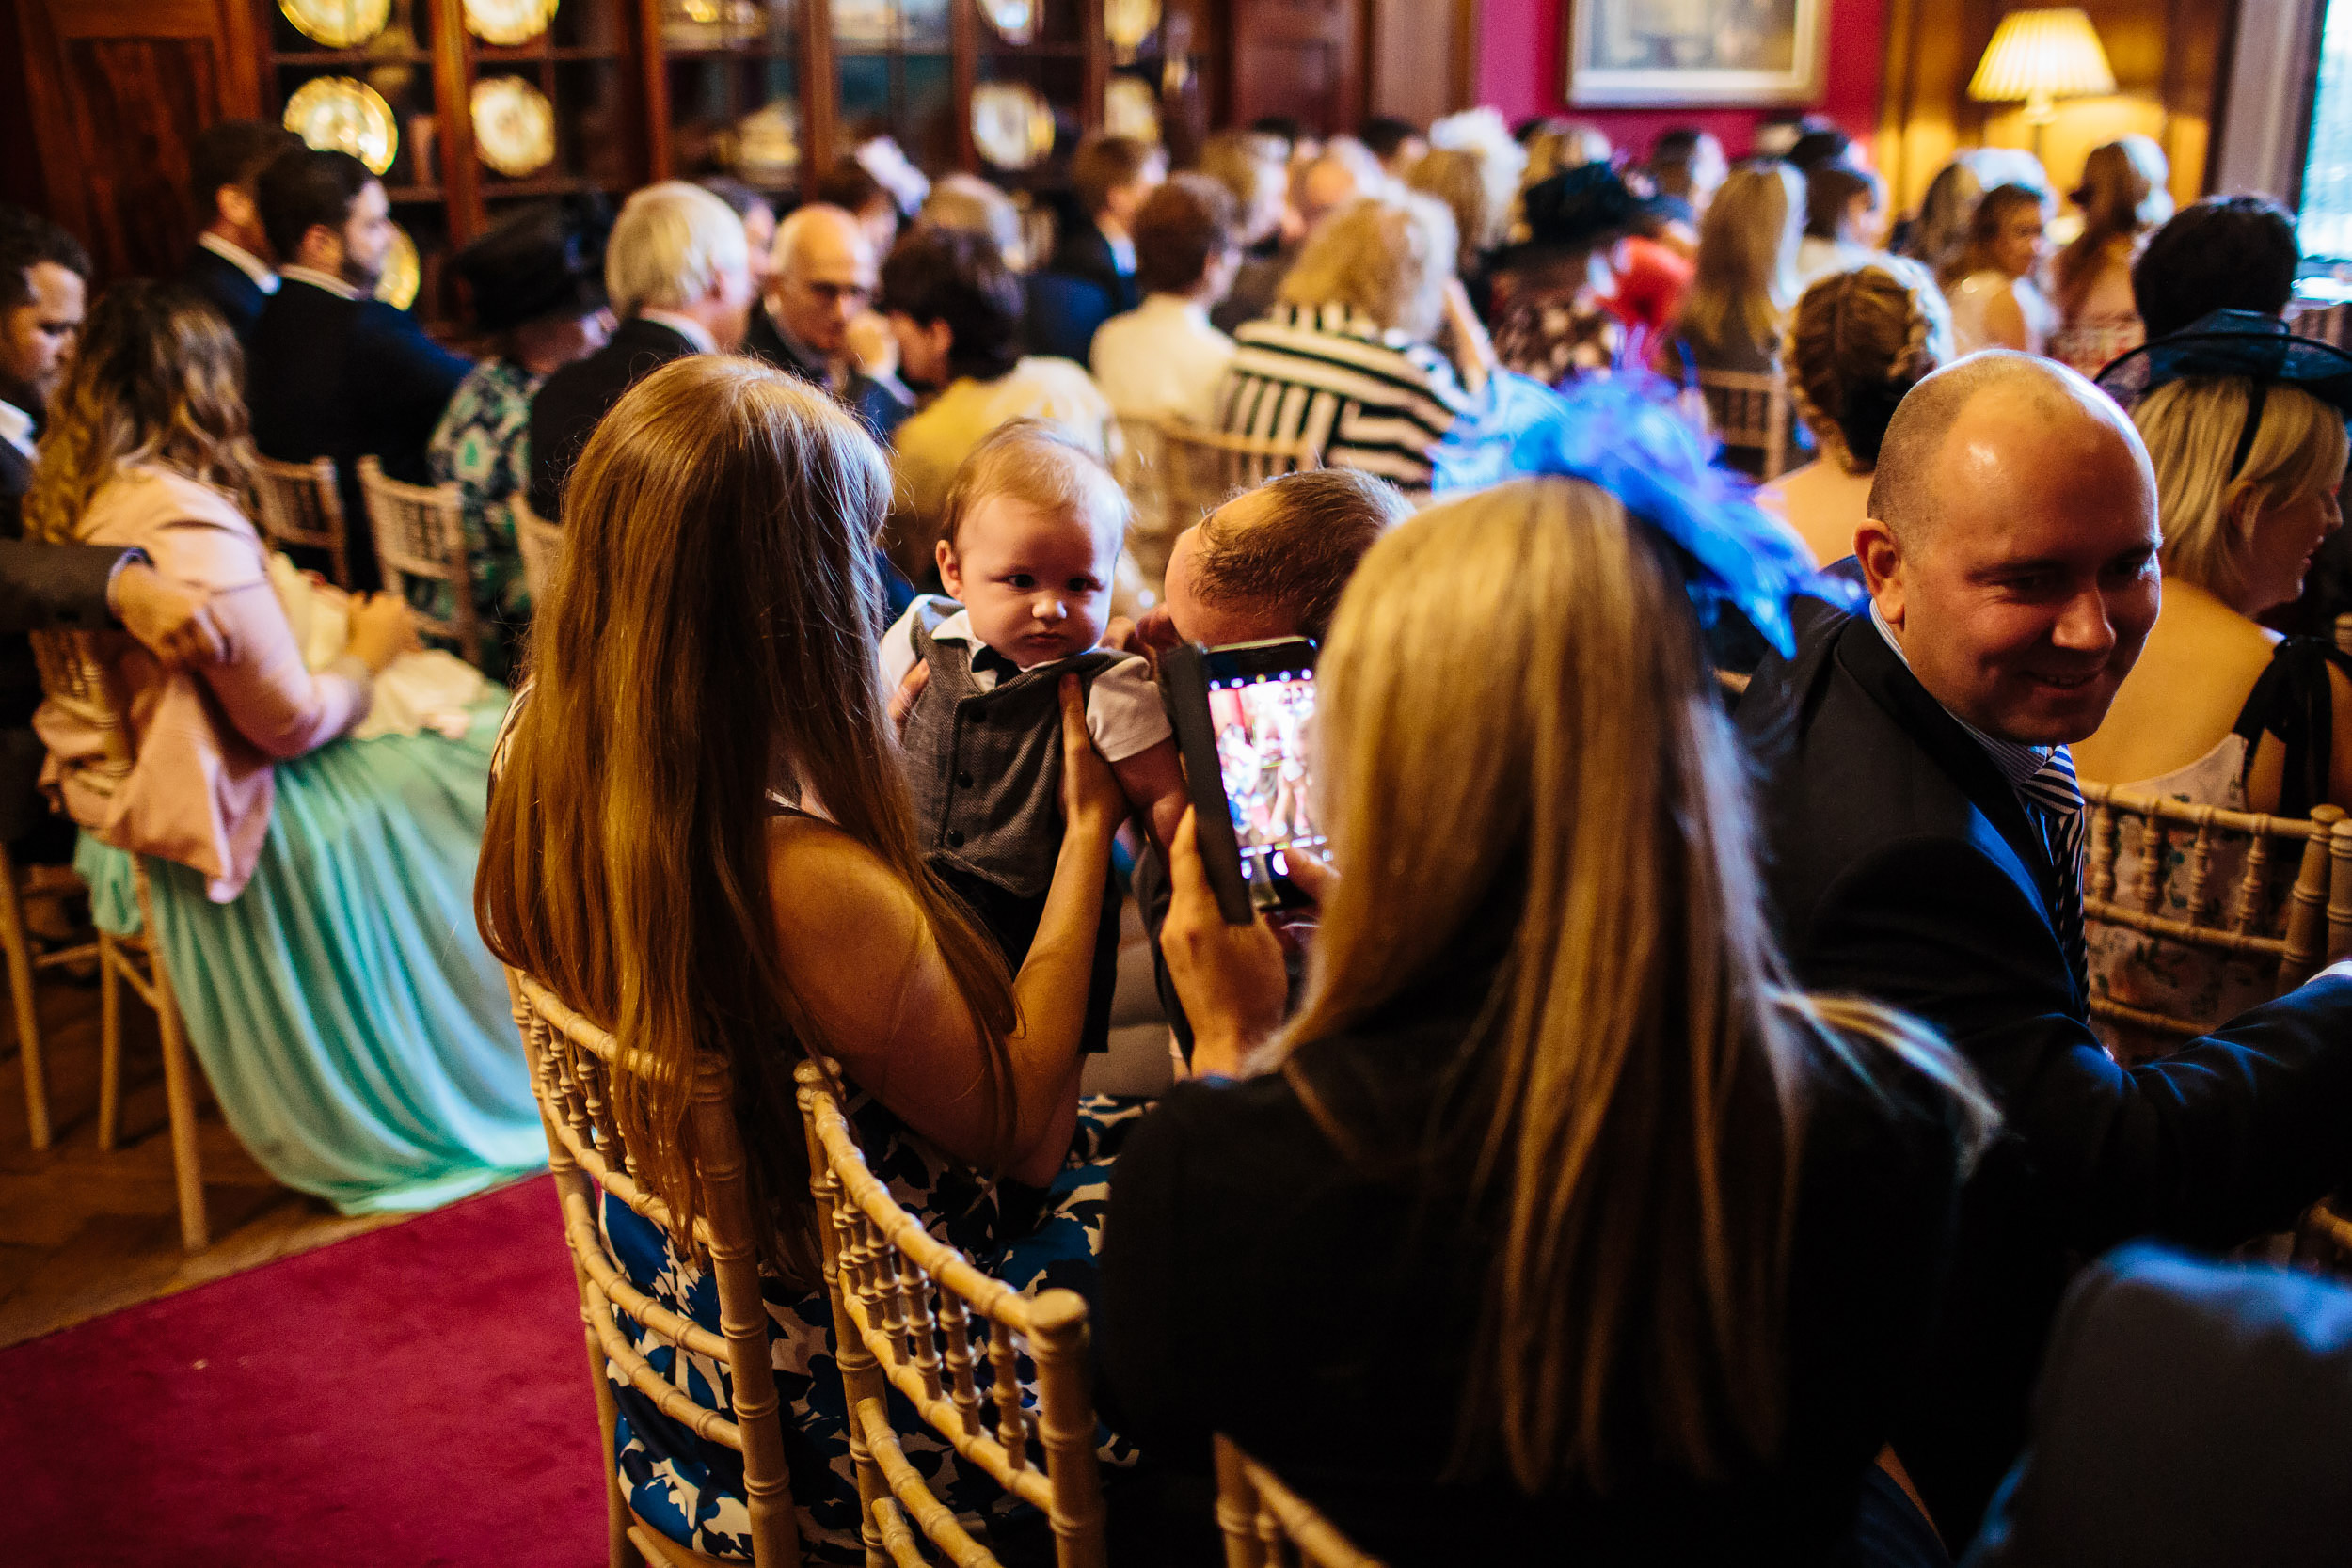 Wedding guests take photo of a baby at Thornton Manor Cheshire